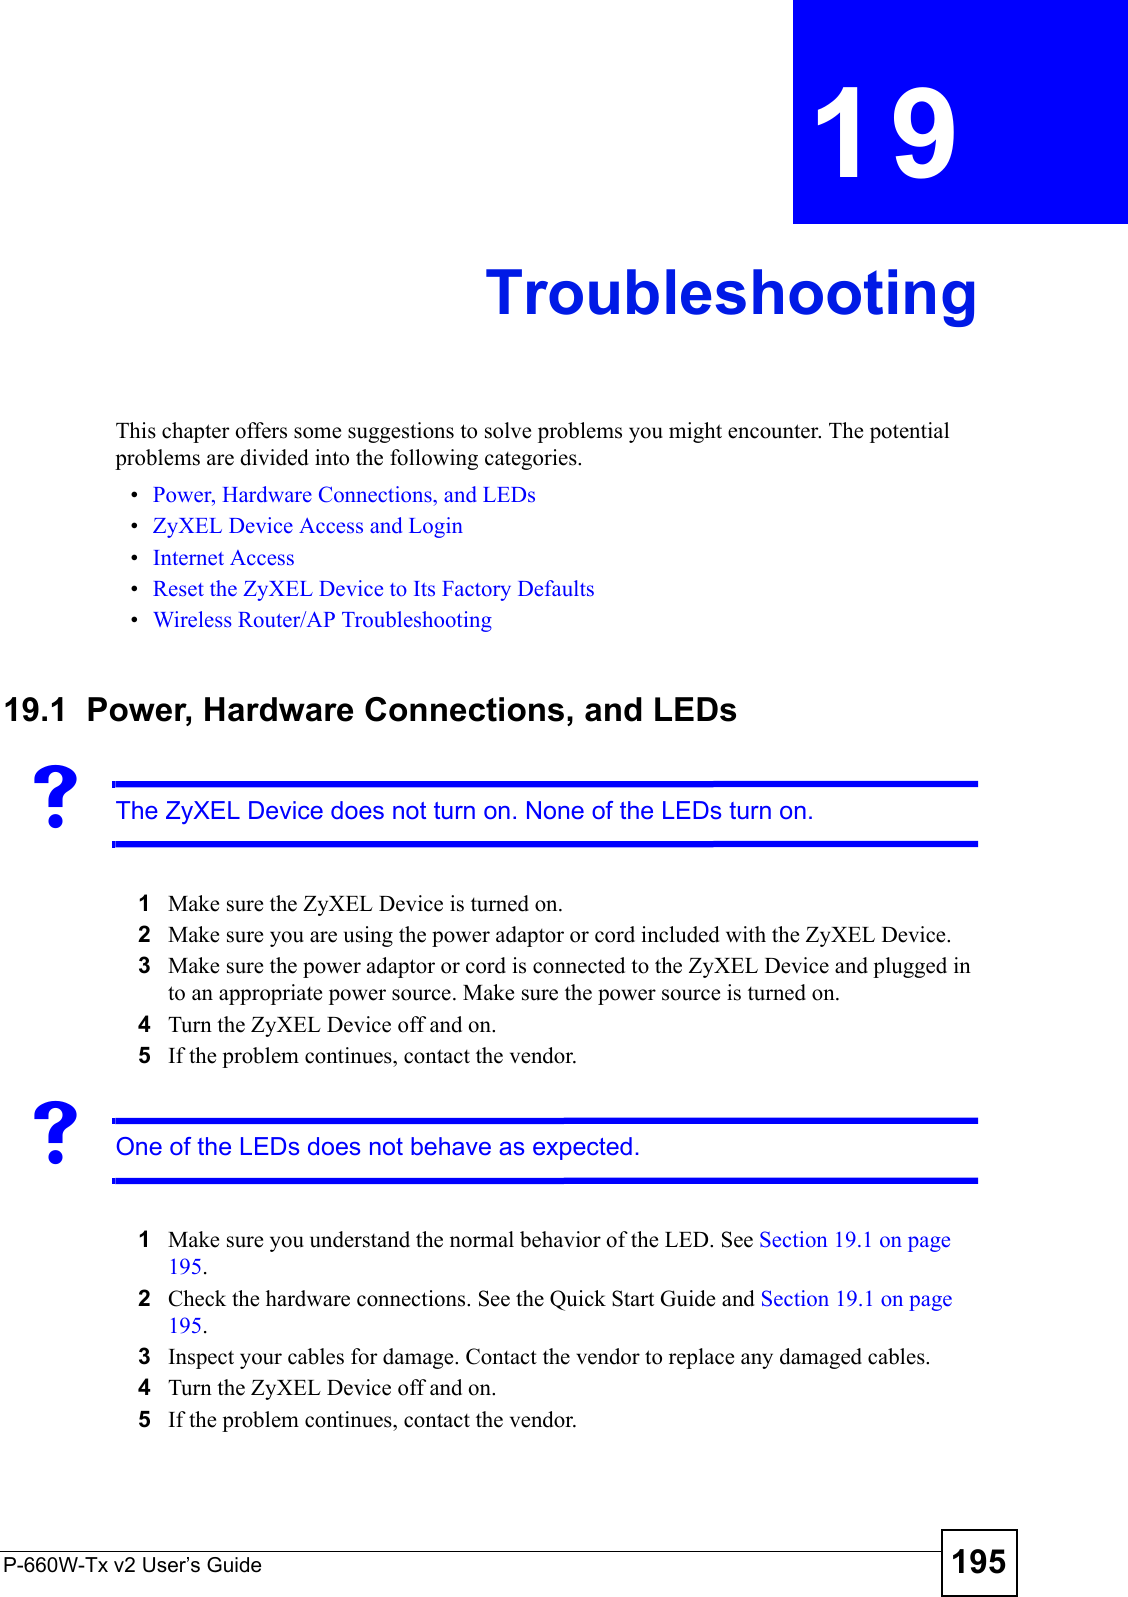 P-660W-Tx v2 User’s Guide 195CHAPTER  19 TroubleshootingThis chapter offers some suggestions to solve problems you might encounter. The potential problems are divided into the following categories. •Power, Hardware Connections, and LEDs•ZyXEL Device Access and Login•Internet Access•Reset the ZyXEL Device to Its Factory Defaults•Wireless Router/AP Troubleshooting19.1  Power, Hardware Connections, and LEDsVThe ZyXEL Device does not turn on. None of the LEDs turn on.1Make sure the ZyXEL Device is turned on. 2Make sure you are using the power adaptor or cord included with the ZyXEL Device.3Make sure the power adaptor or cord is connected to the ZyXEL Device and plugged in to an appropriate power source. Make sure the power source is turned on.4Turn the ZyXEL Device off and on.5If the problem continues, contact the vendor.VOne of the LEDs does not behave as expected.1Make sure you understand the normal behavior of the LED. See Section 19.1 on page 195.2Check the hardware connections. See the Quick Start Guide and Section 19.1 on page 195. 3Inspect your cables for damage. Contact the vendor to replace any damaged cables.4Turn the ZyXEL Device off and on. 5If the problem continues, contact the vendor.